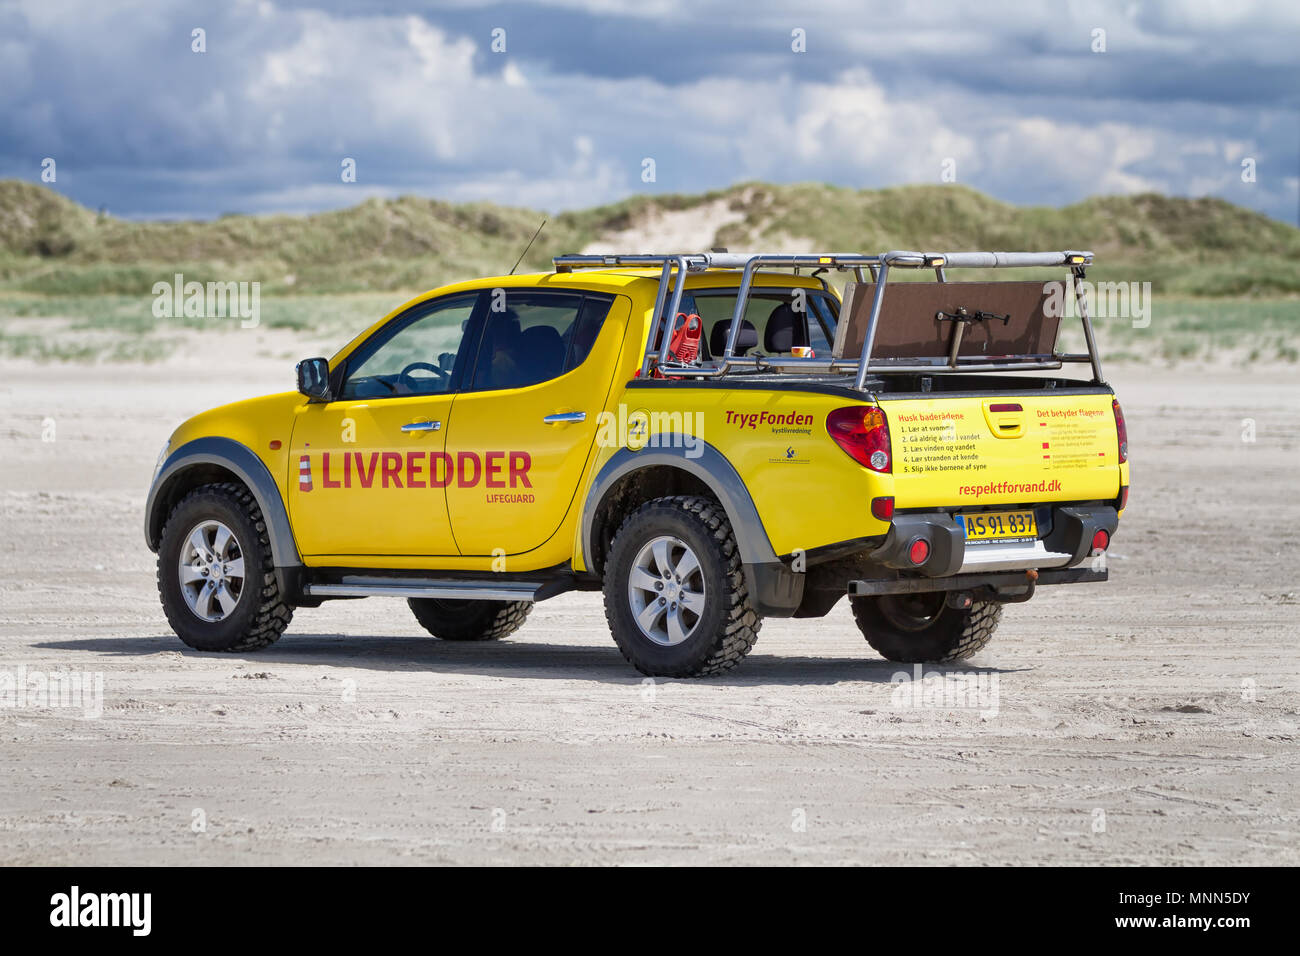 Lifeguards in a pick-up truck in denmark Stock Photo